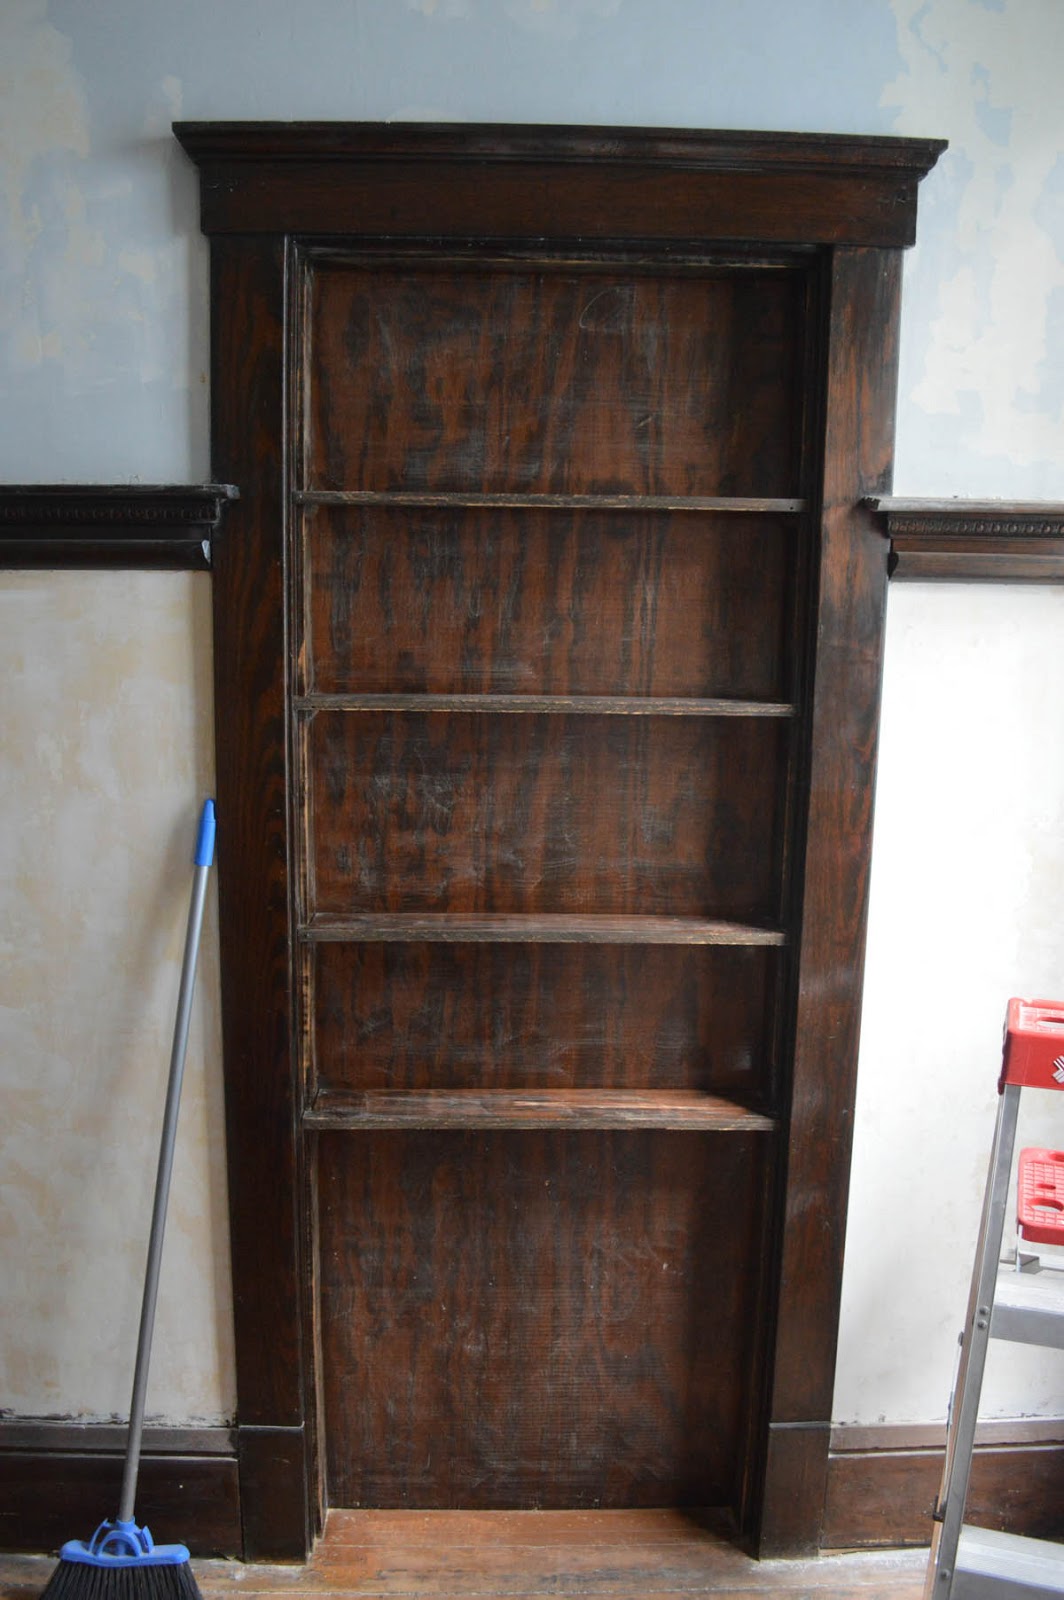 Very Unfunctional Built In Bookcase Can Really Only Hold Knick